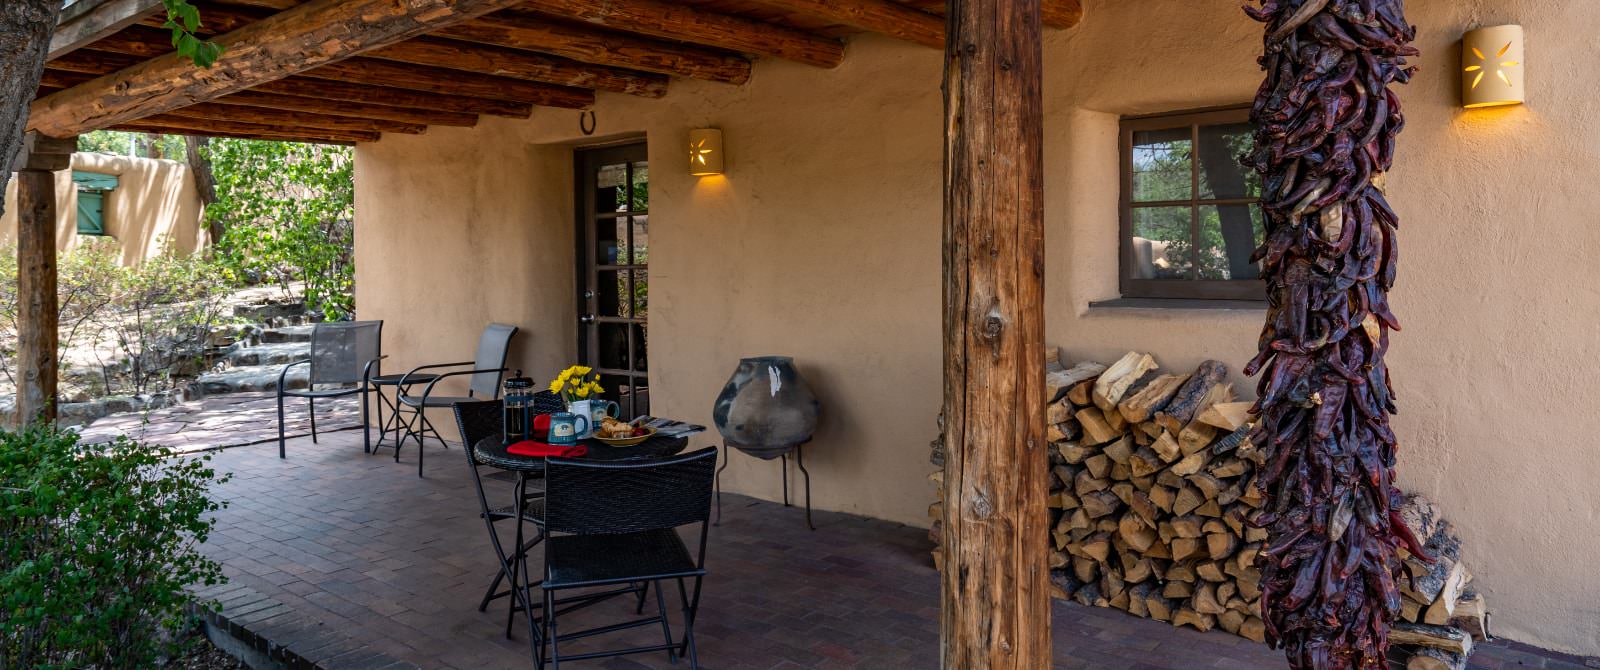 Patio under wooden overhand of adobe building with seating and stack of wood.